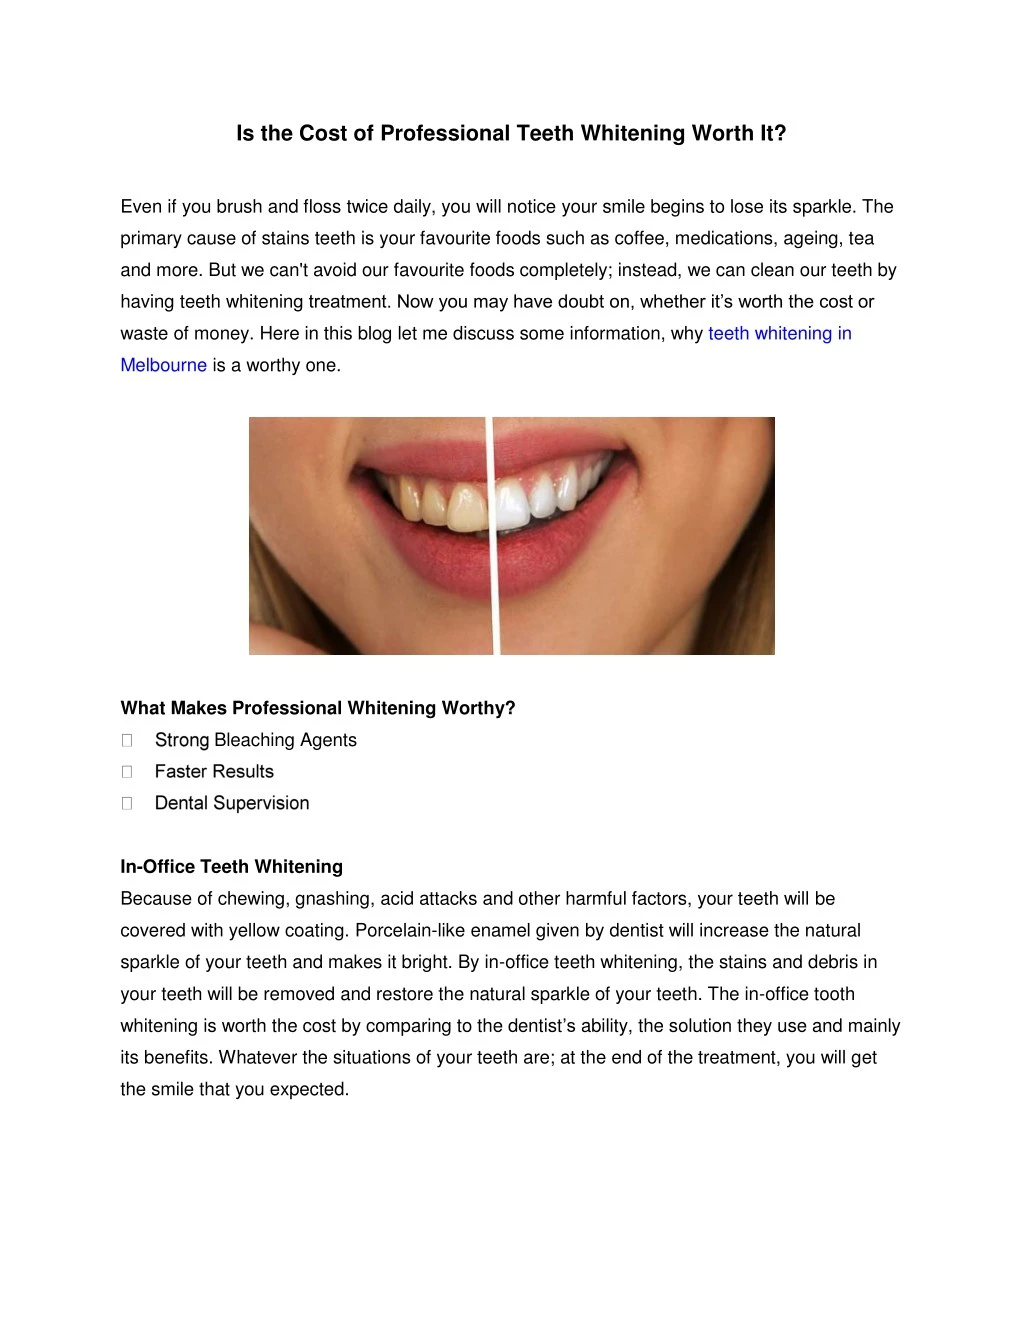 is the cost of professional teeth whitening worth